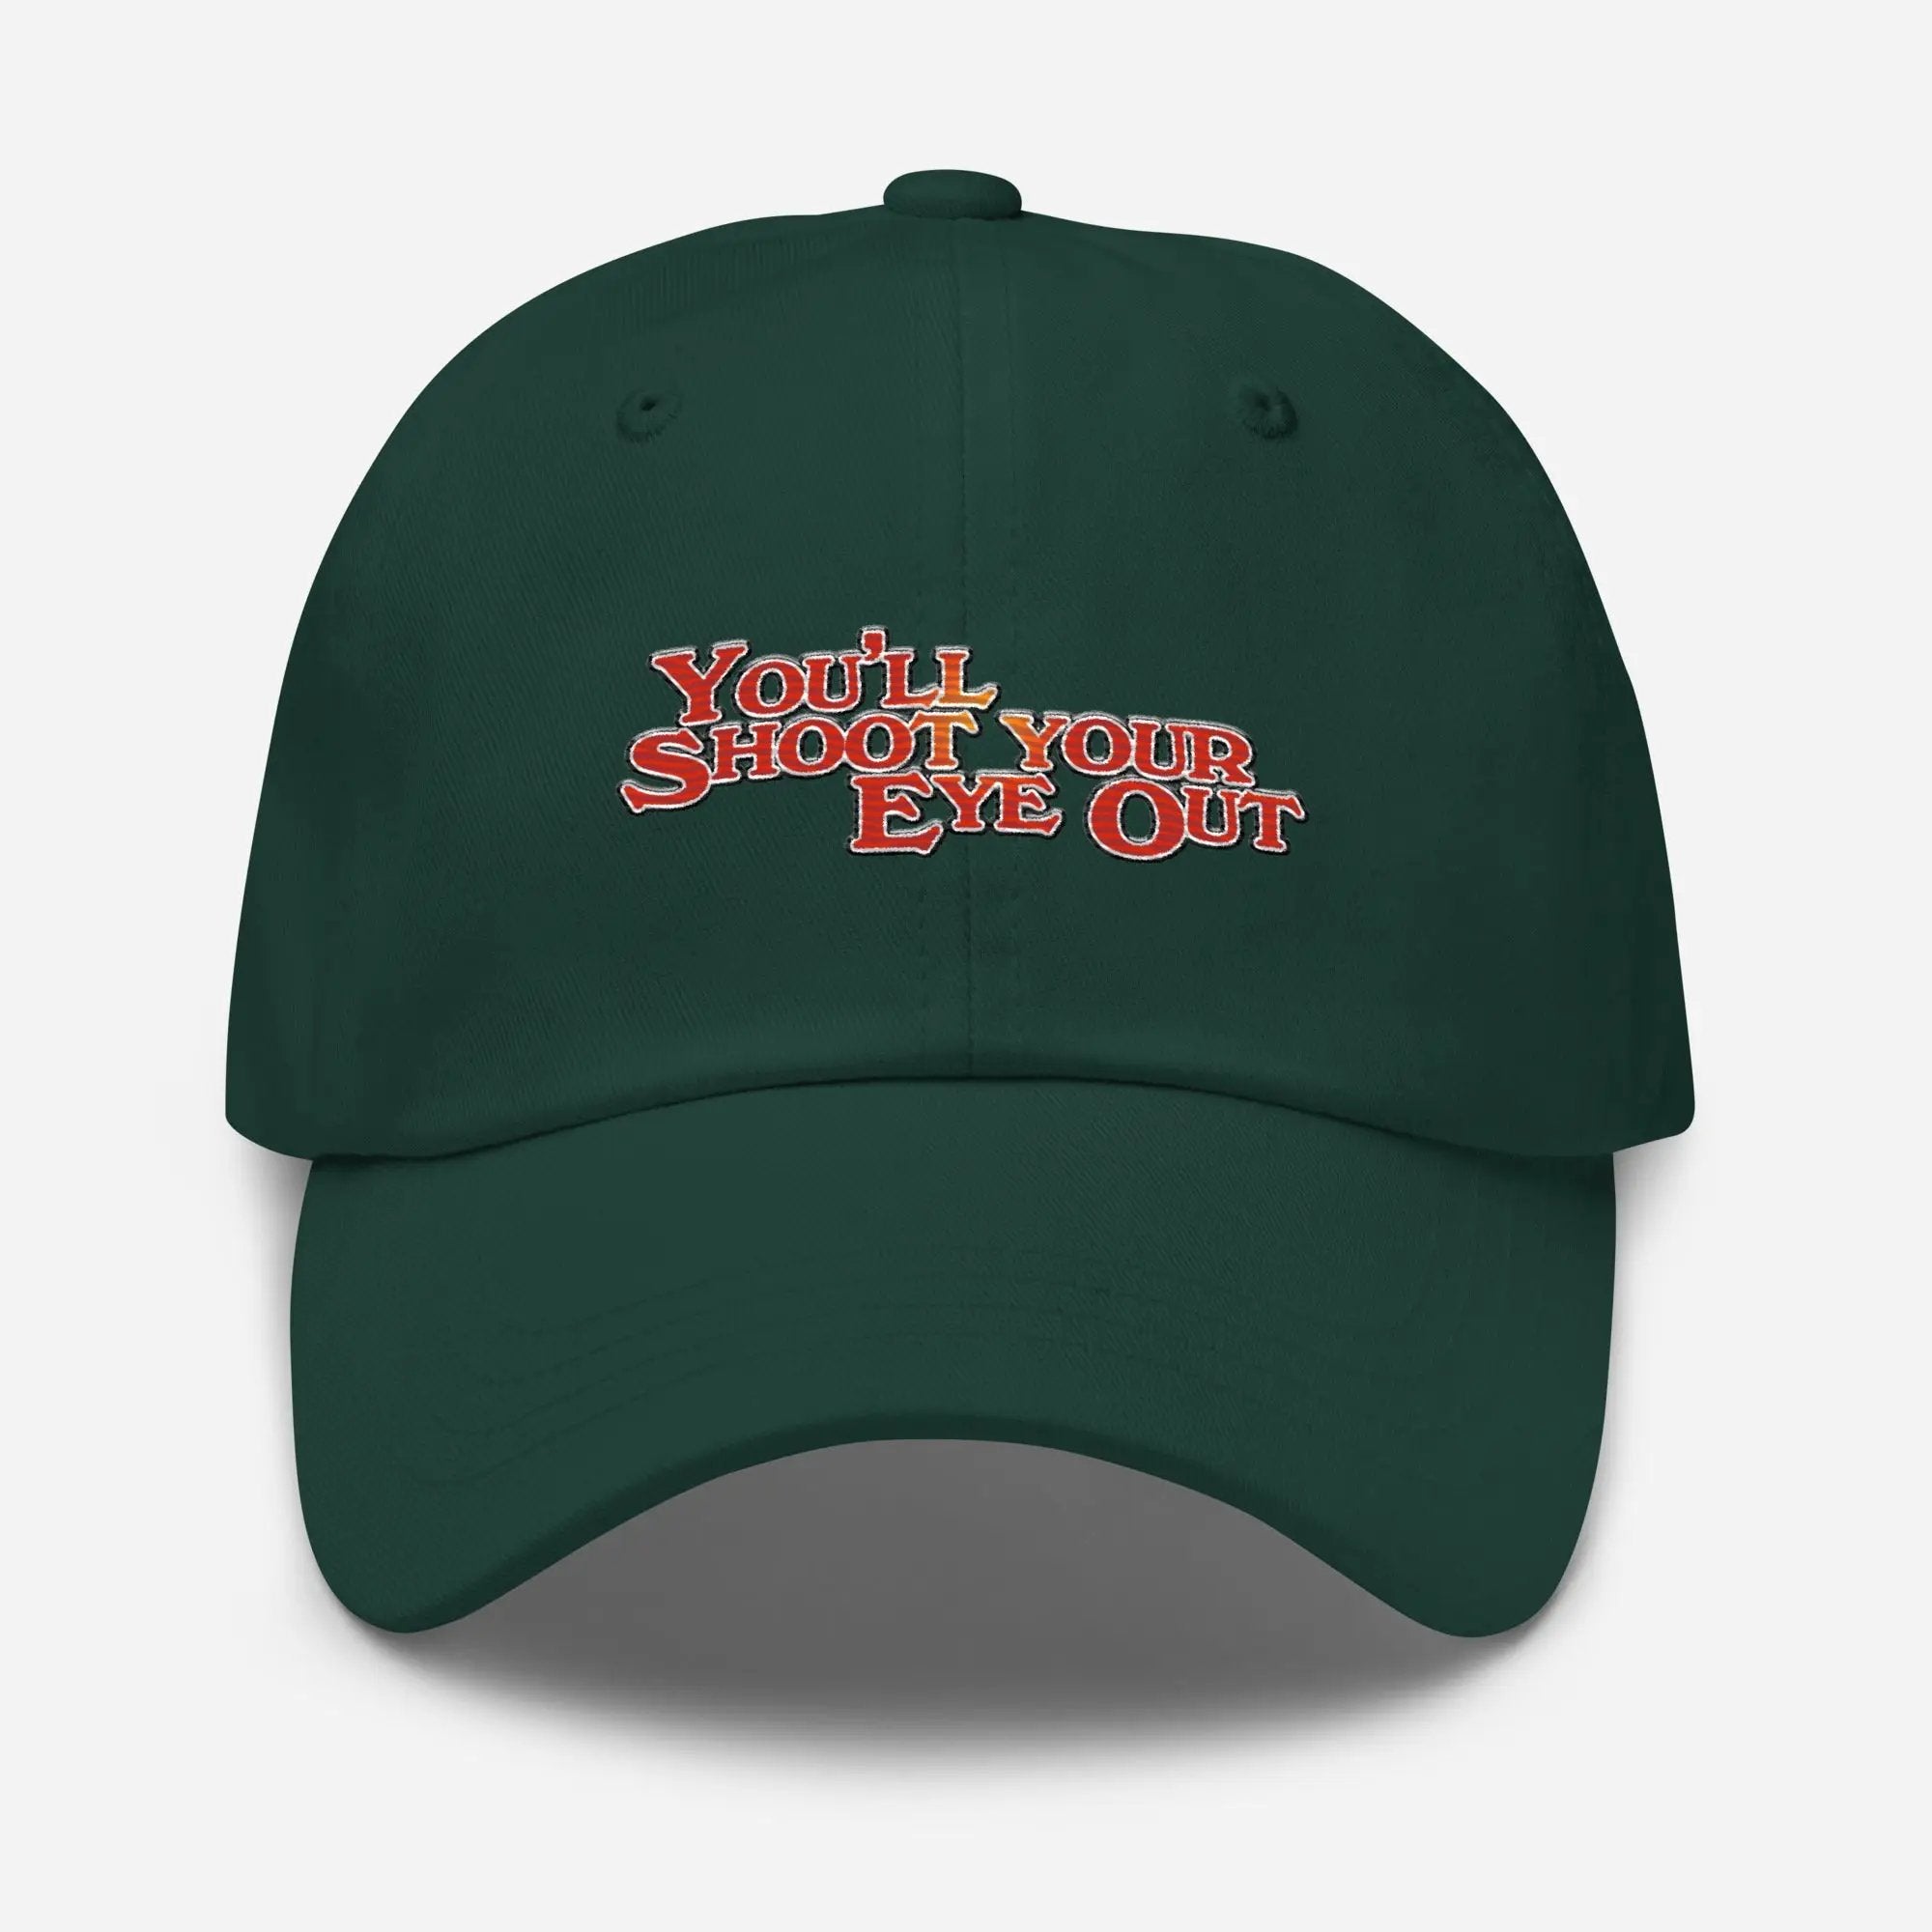 a green hat that says you shoot your eye out